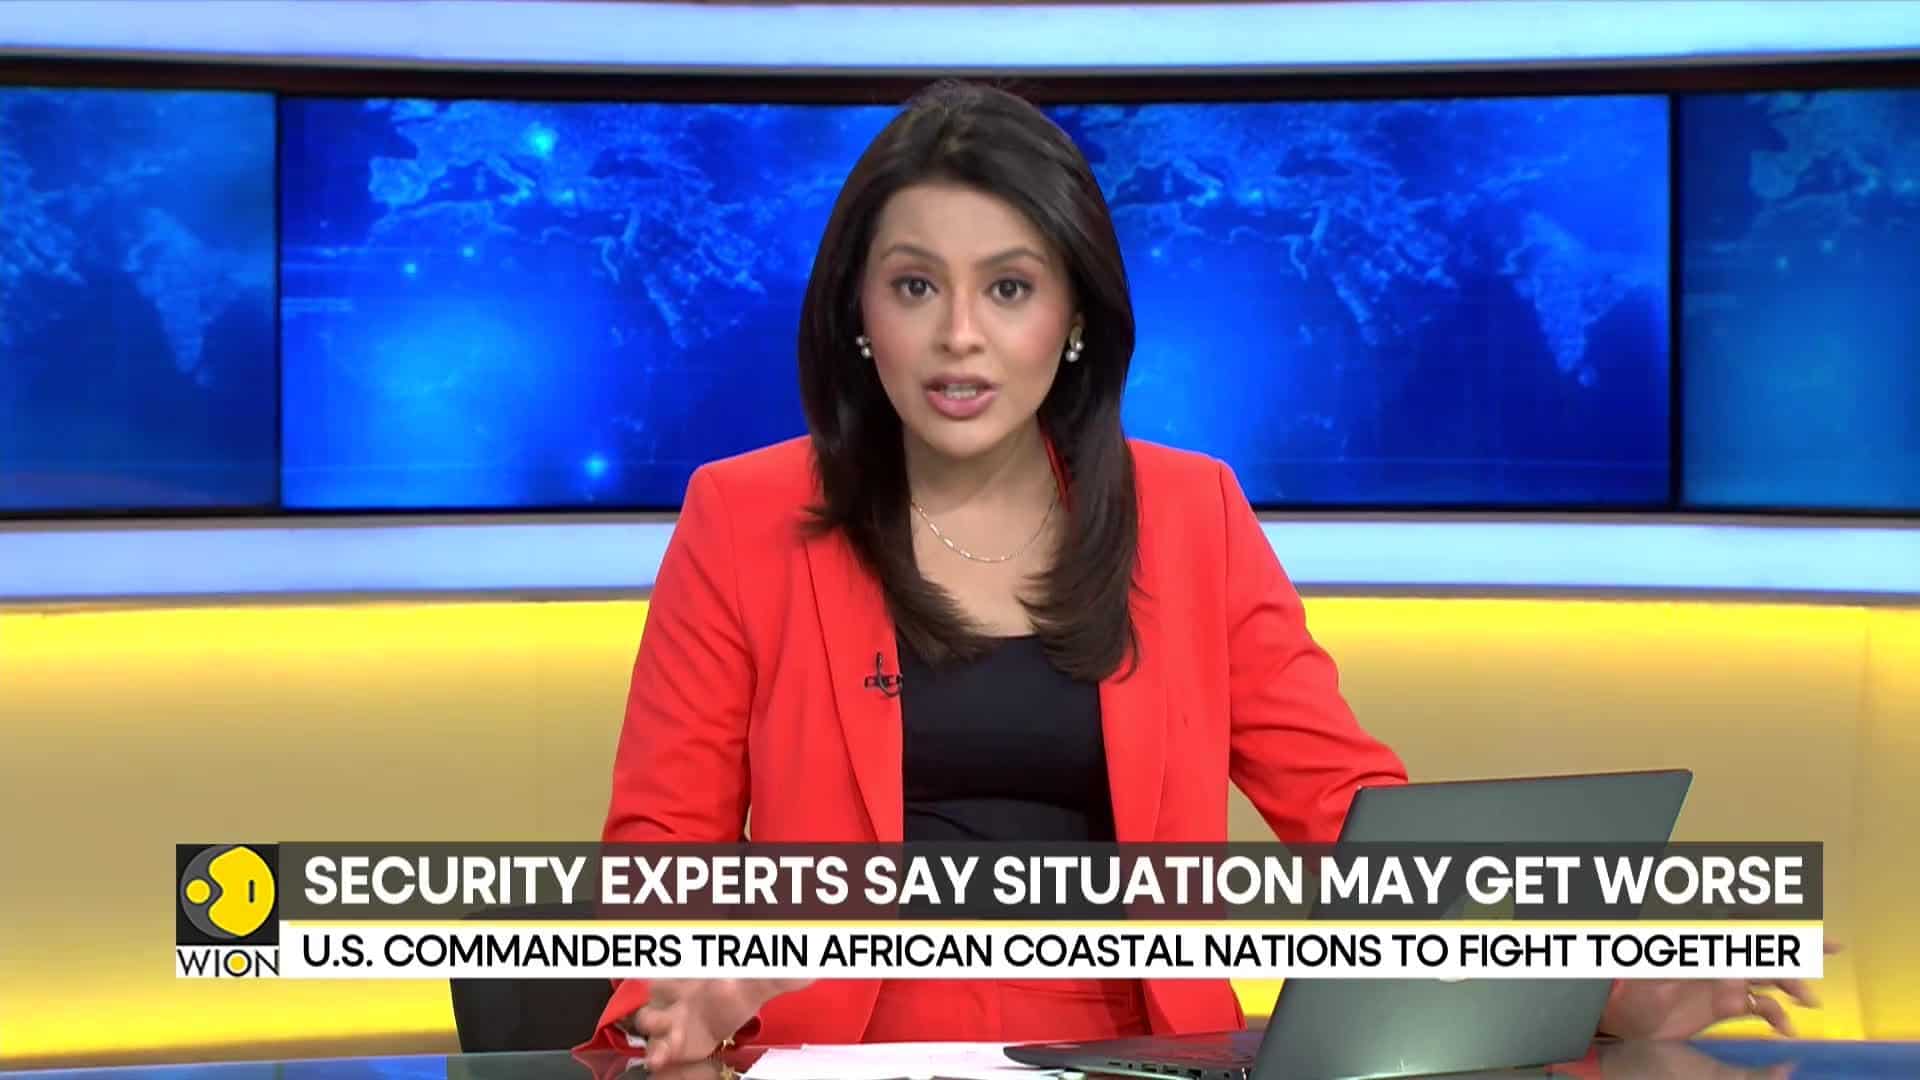 Africa insurgency: Security experts say situation may get worse